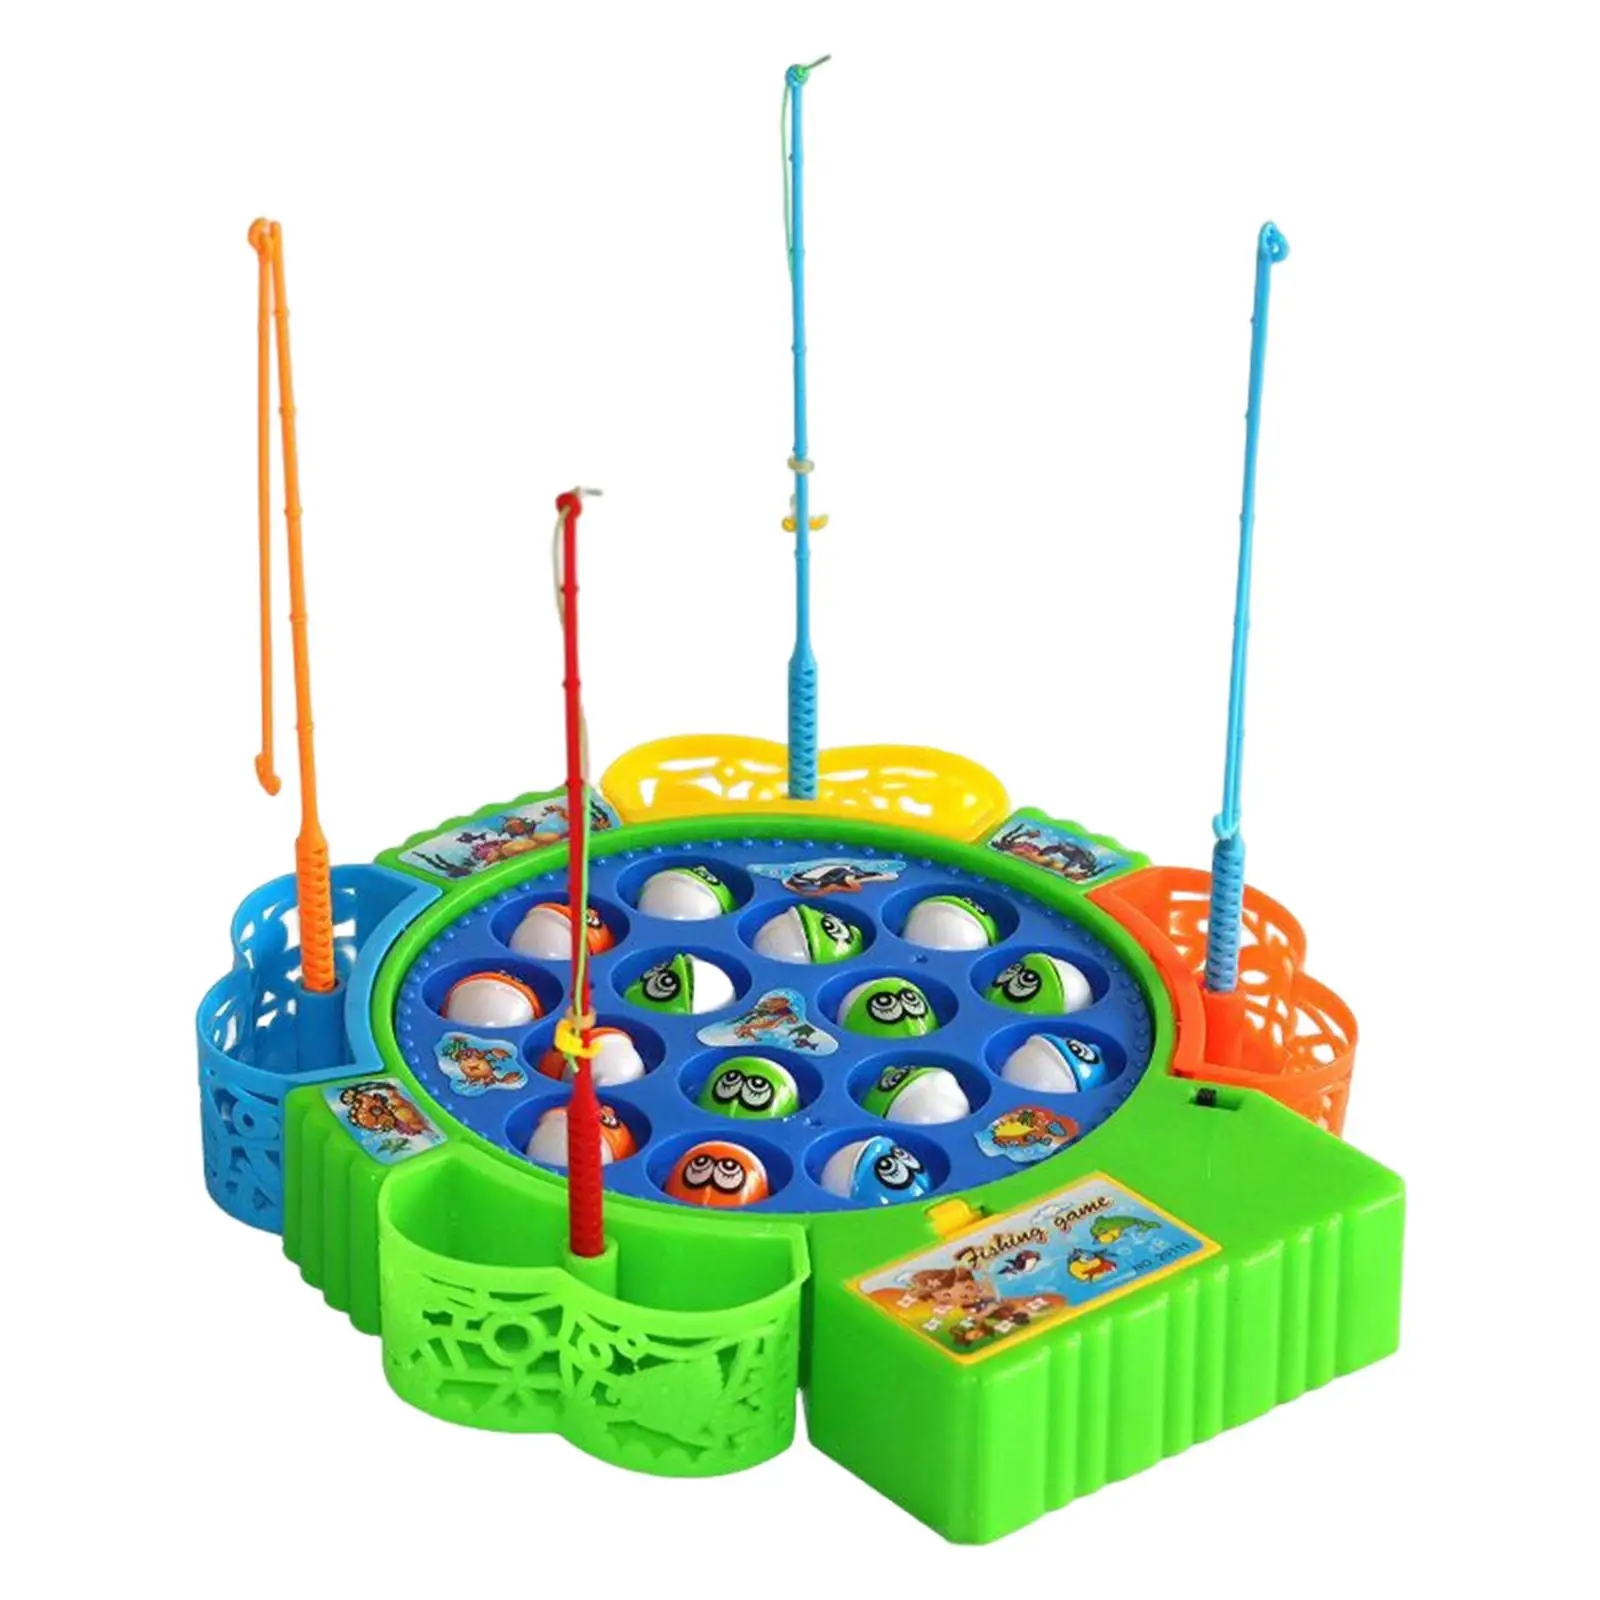 Novelty, Spinning Game, Kids Toy, Fine Motor Skill, Kids Toy, Game for 3-5 Years